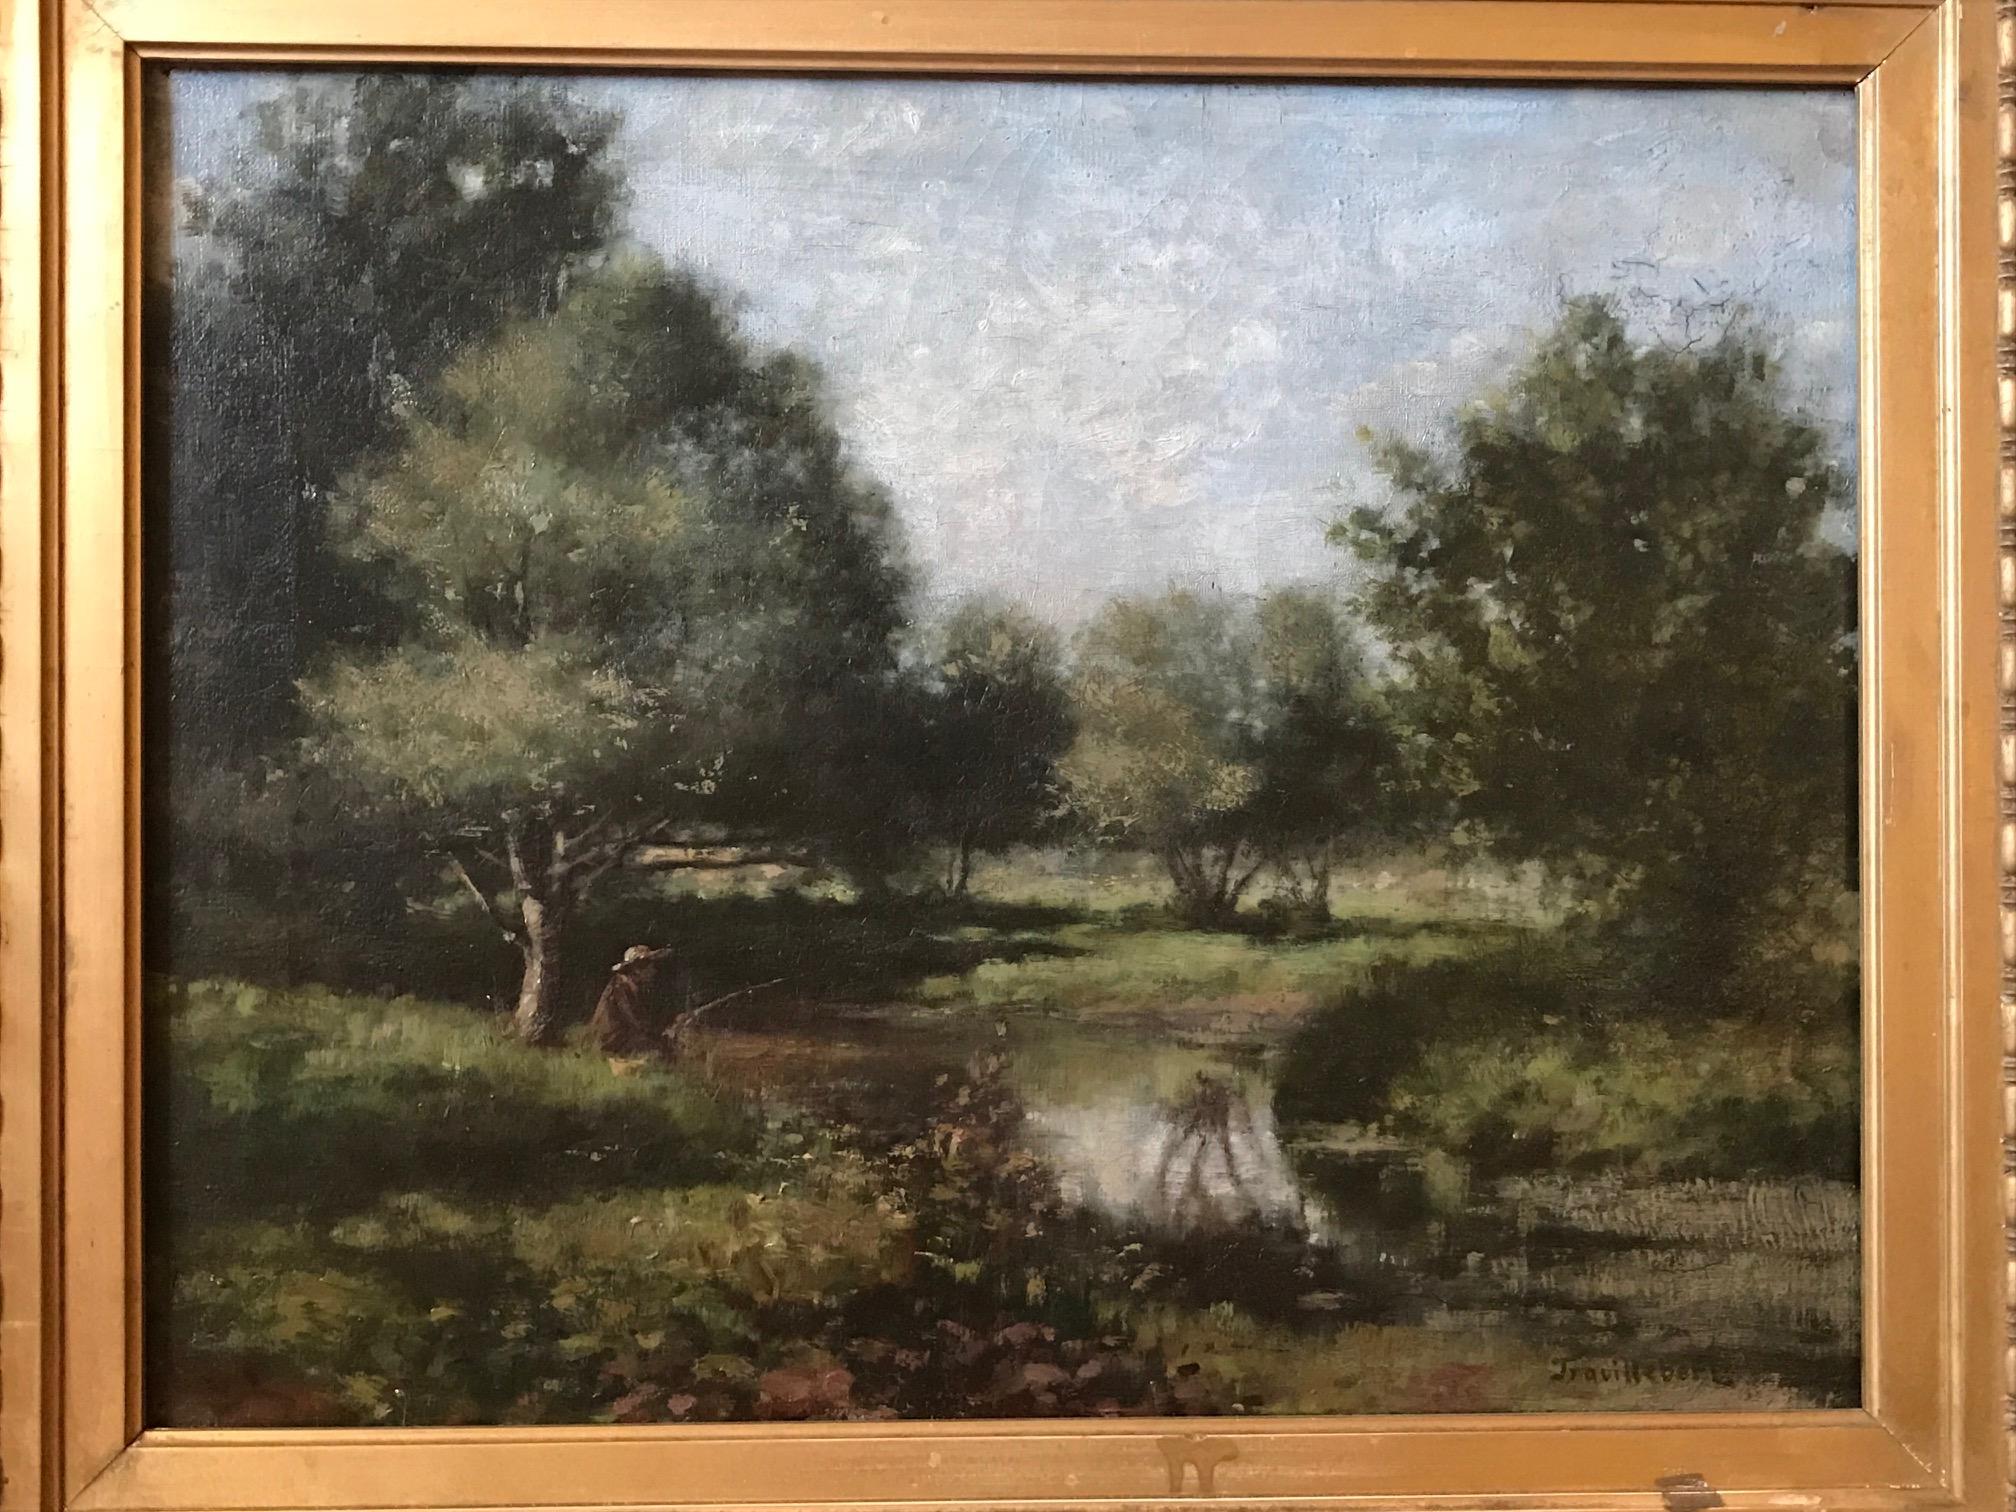 This is a beautiful landscape painting from the French Barbizon School. The oil painting on canvas shows the typical style of atmospheric silvery landscape in cool damp colors. It is signed on the lower right - TROUILLEBERT -. The painting is housed